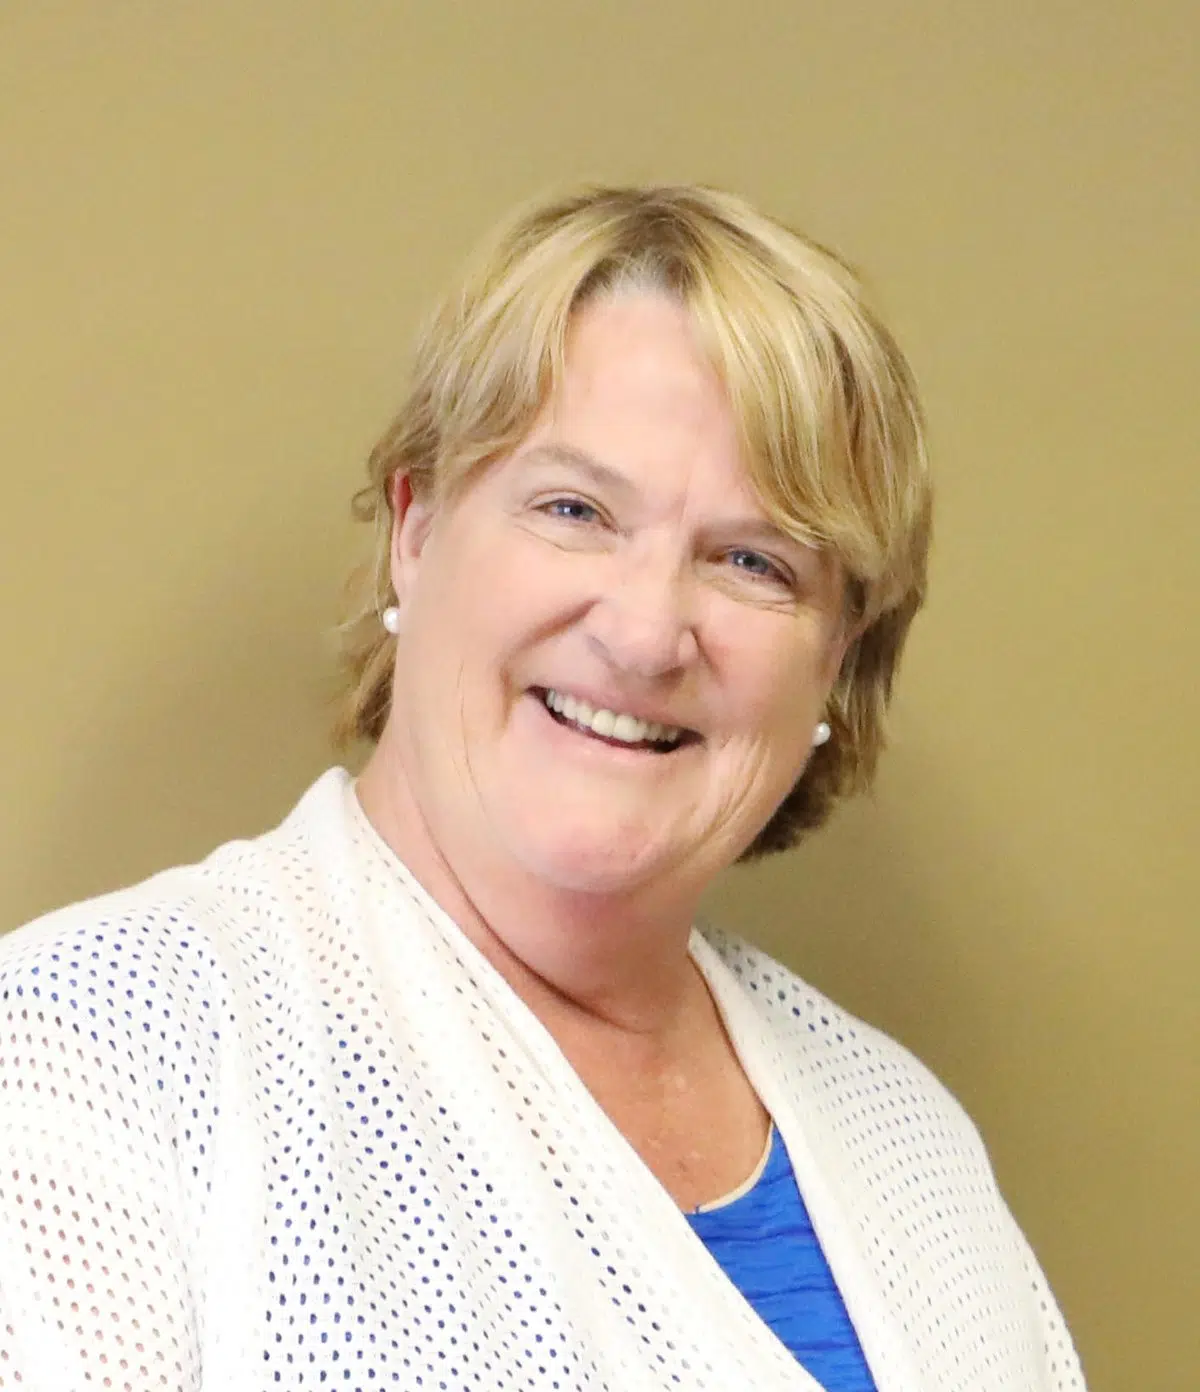 Kamloops MP Cathy McLeod isn't Happy with Comments Made by PM Justin Trudeau